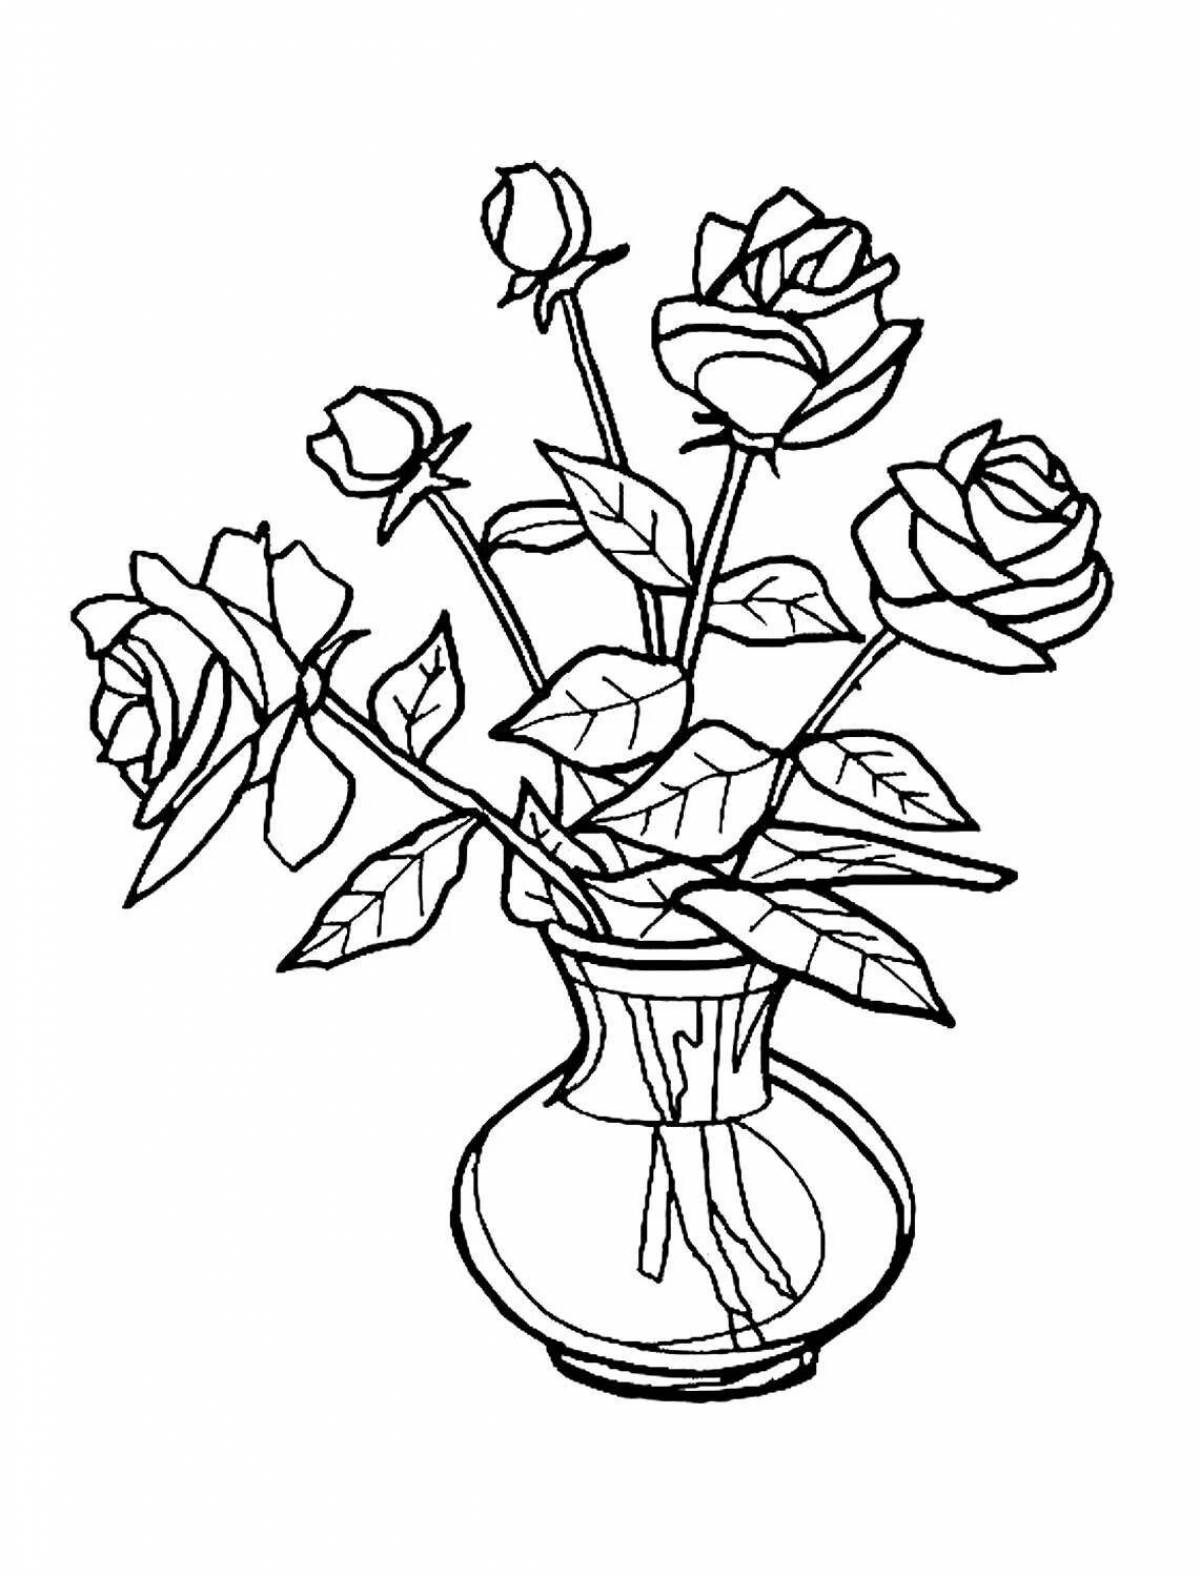 A beautiful bouquet of flowers in a vase coloring book